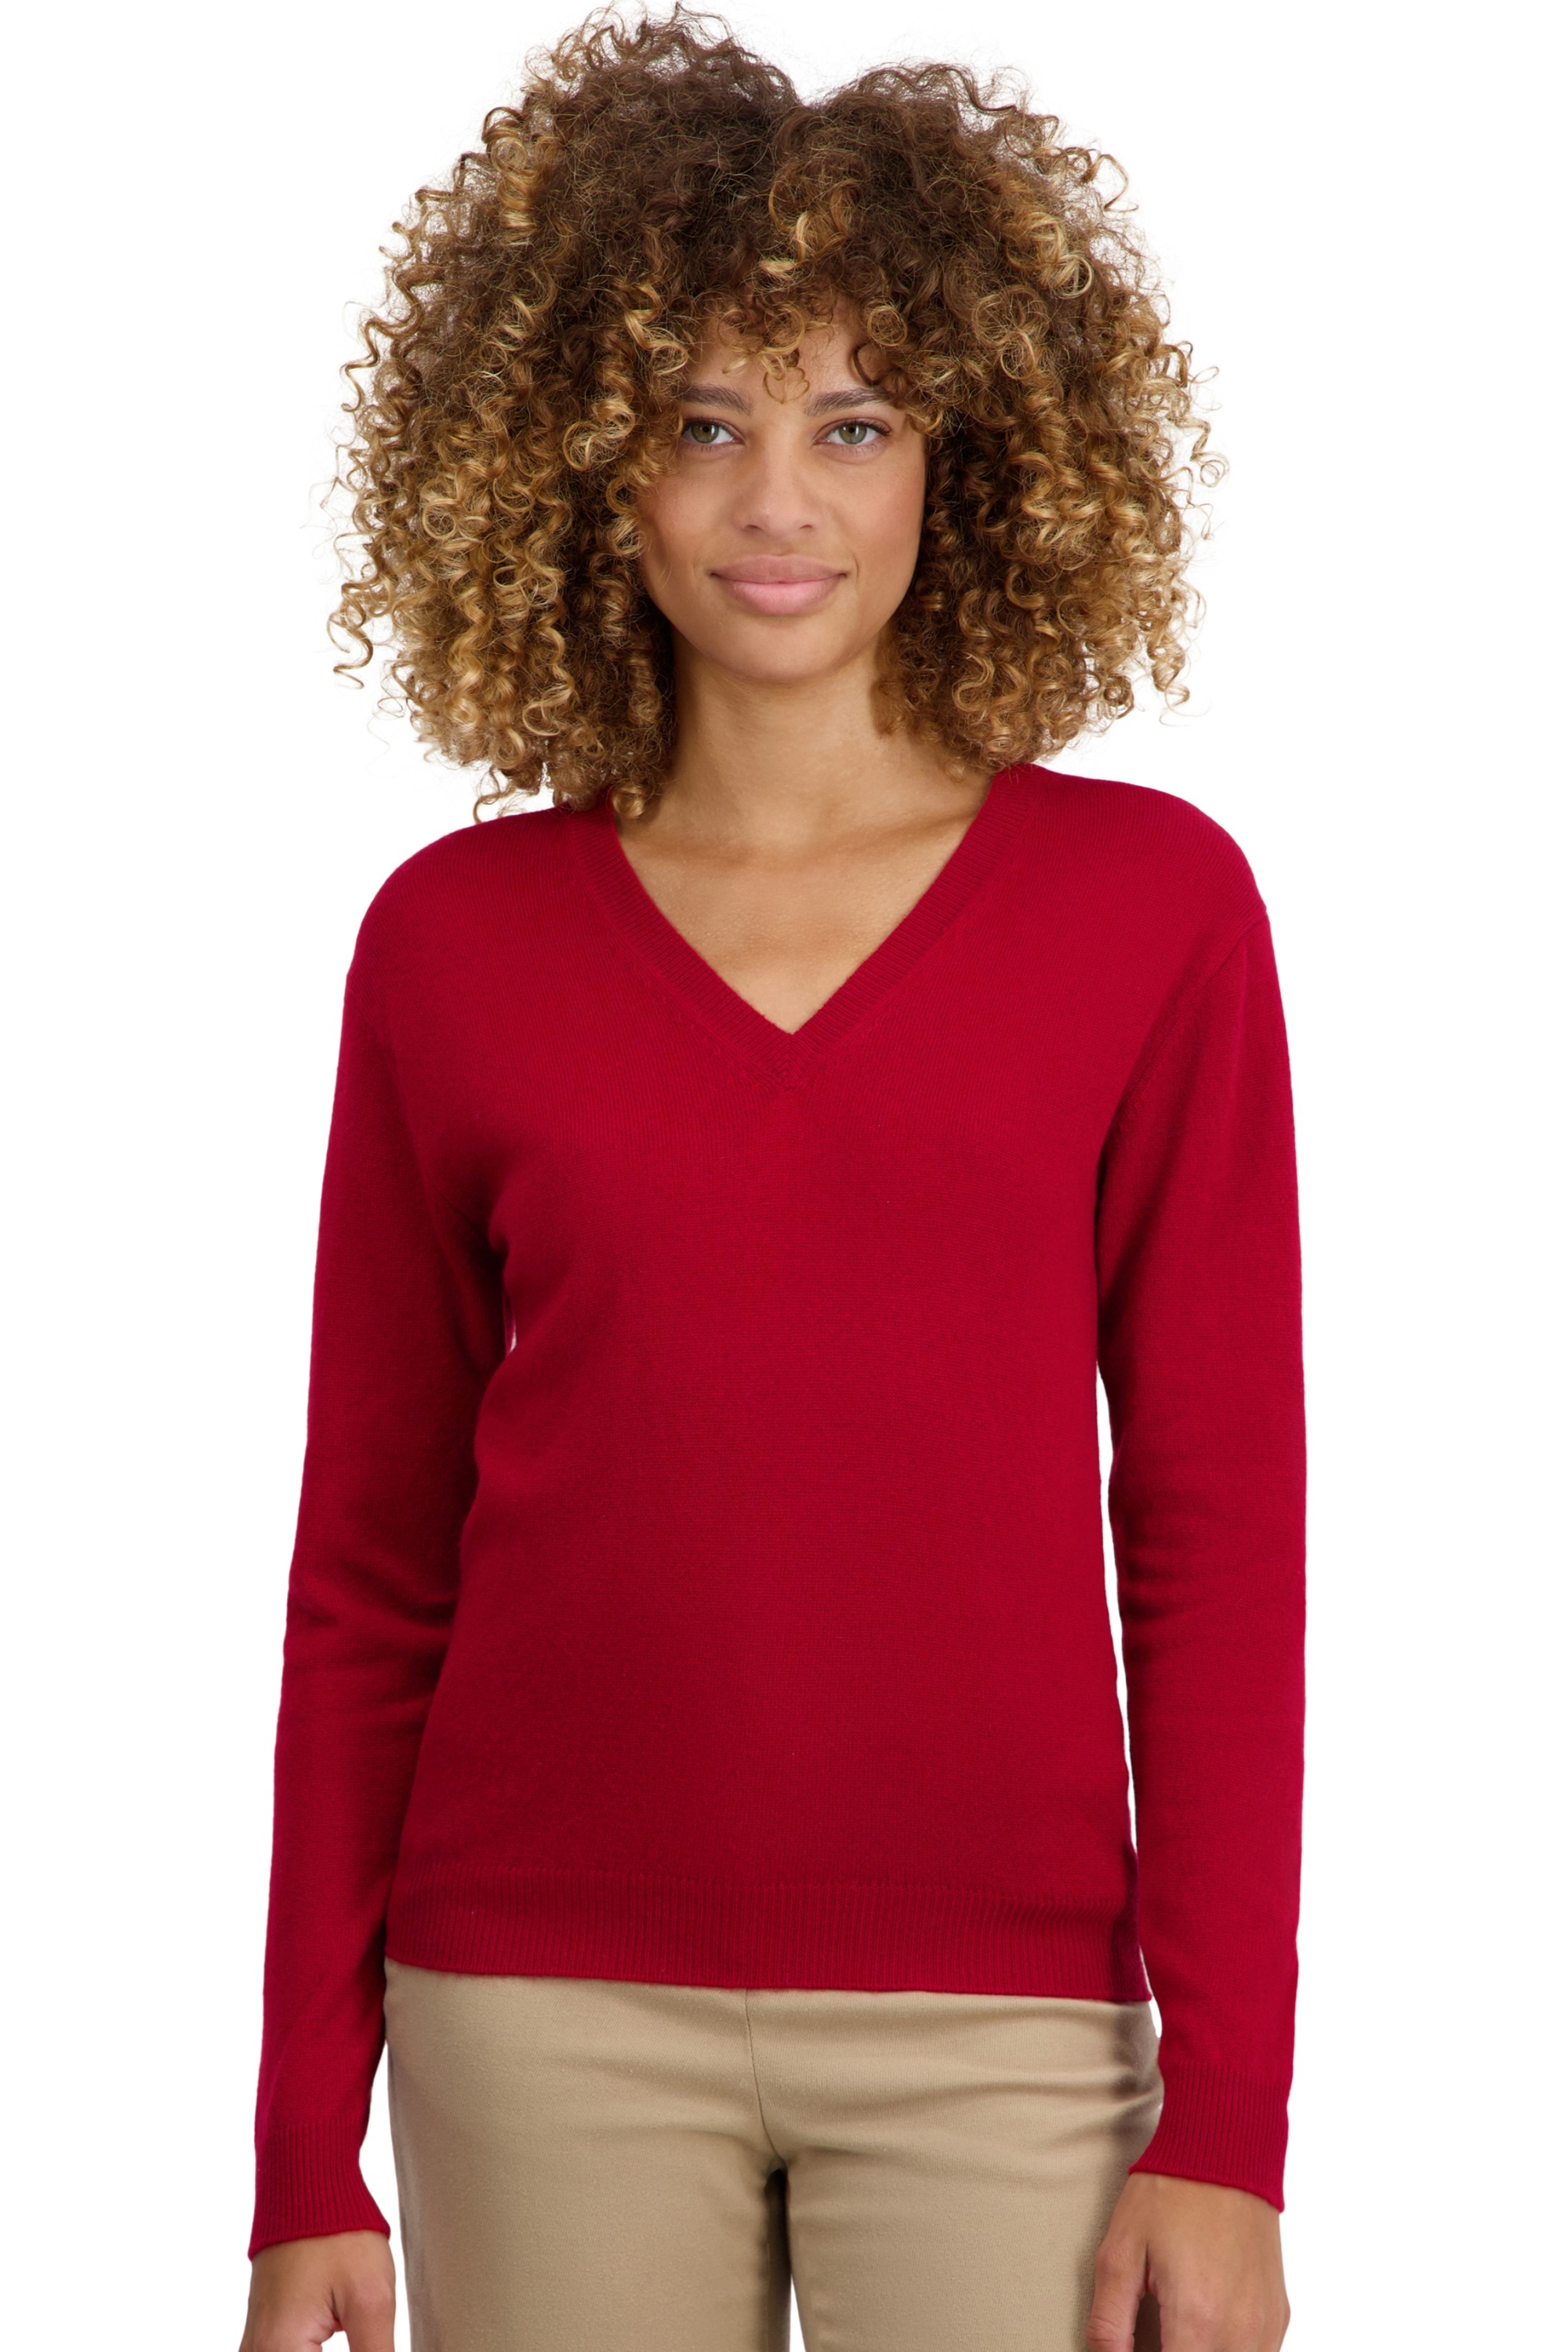 Cashmere ladies basic sweaters at low prices tessa first garnet xl